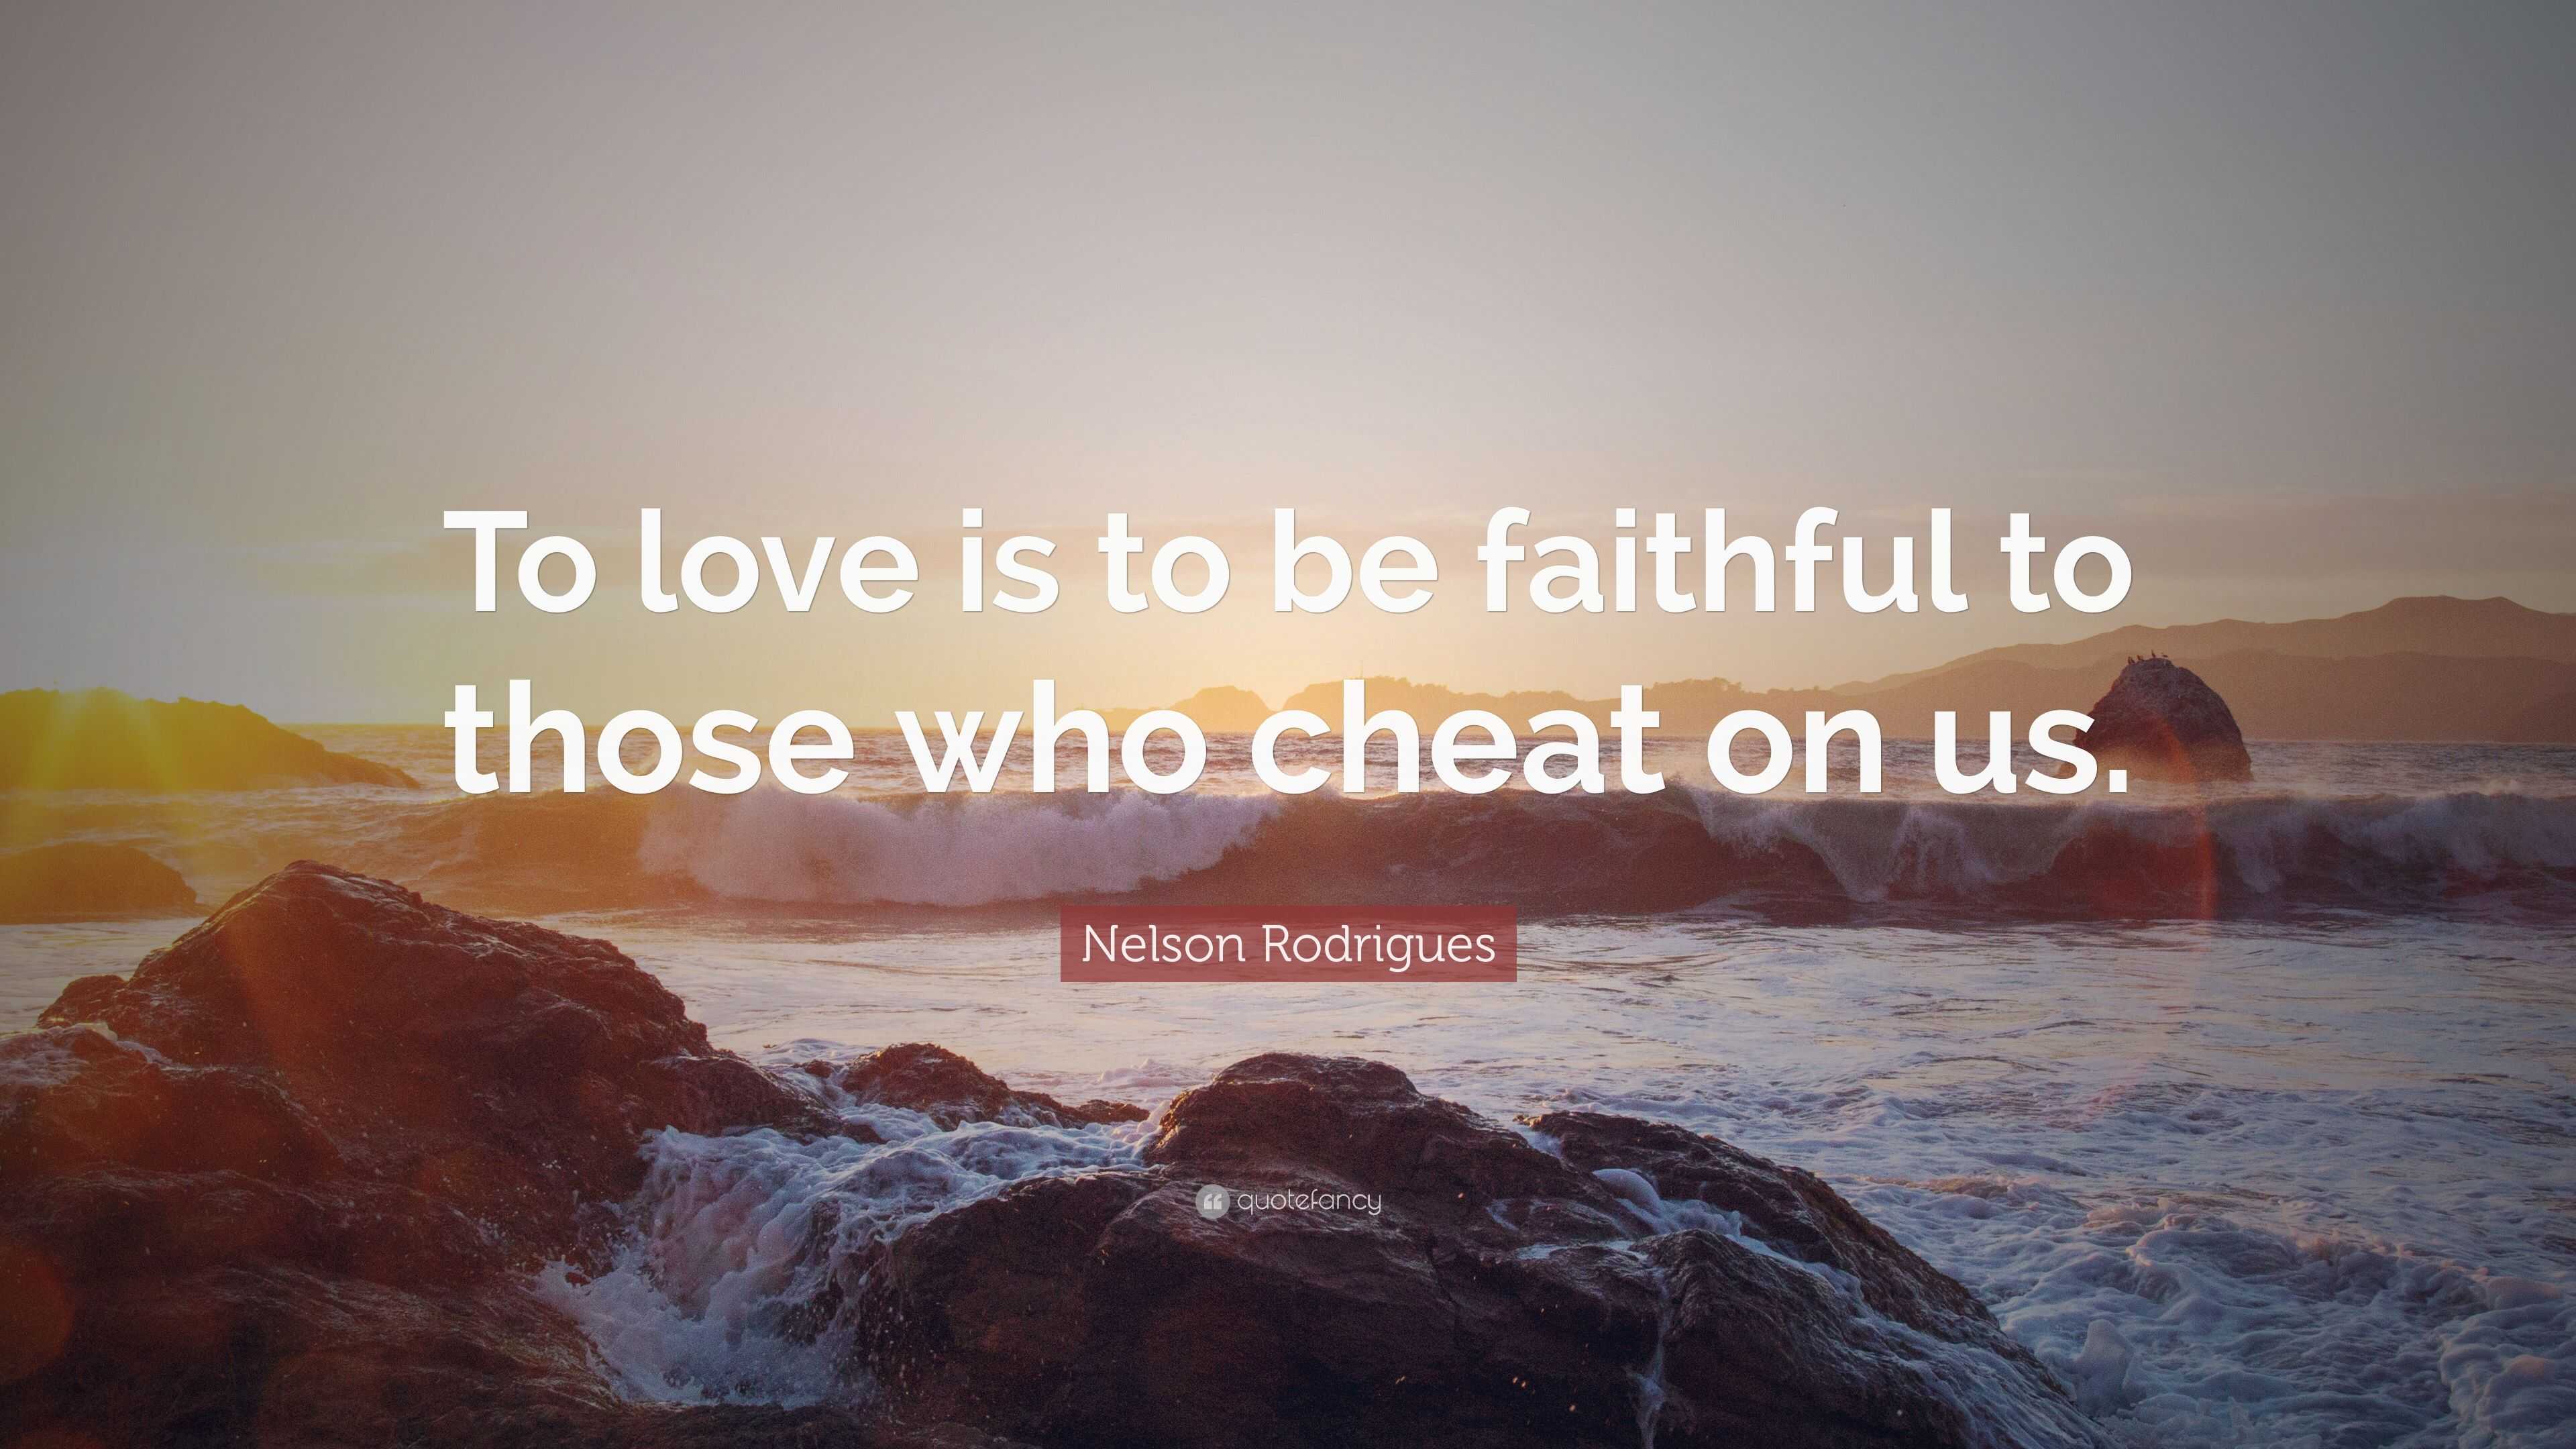 Nelson Rodrigues Quote: “To love is to be faithful to those who cheat on  us.”